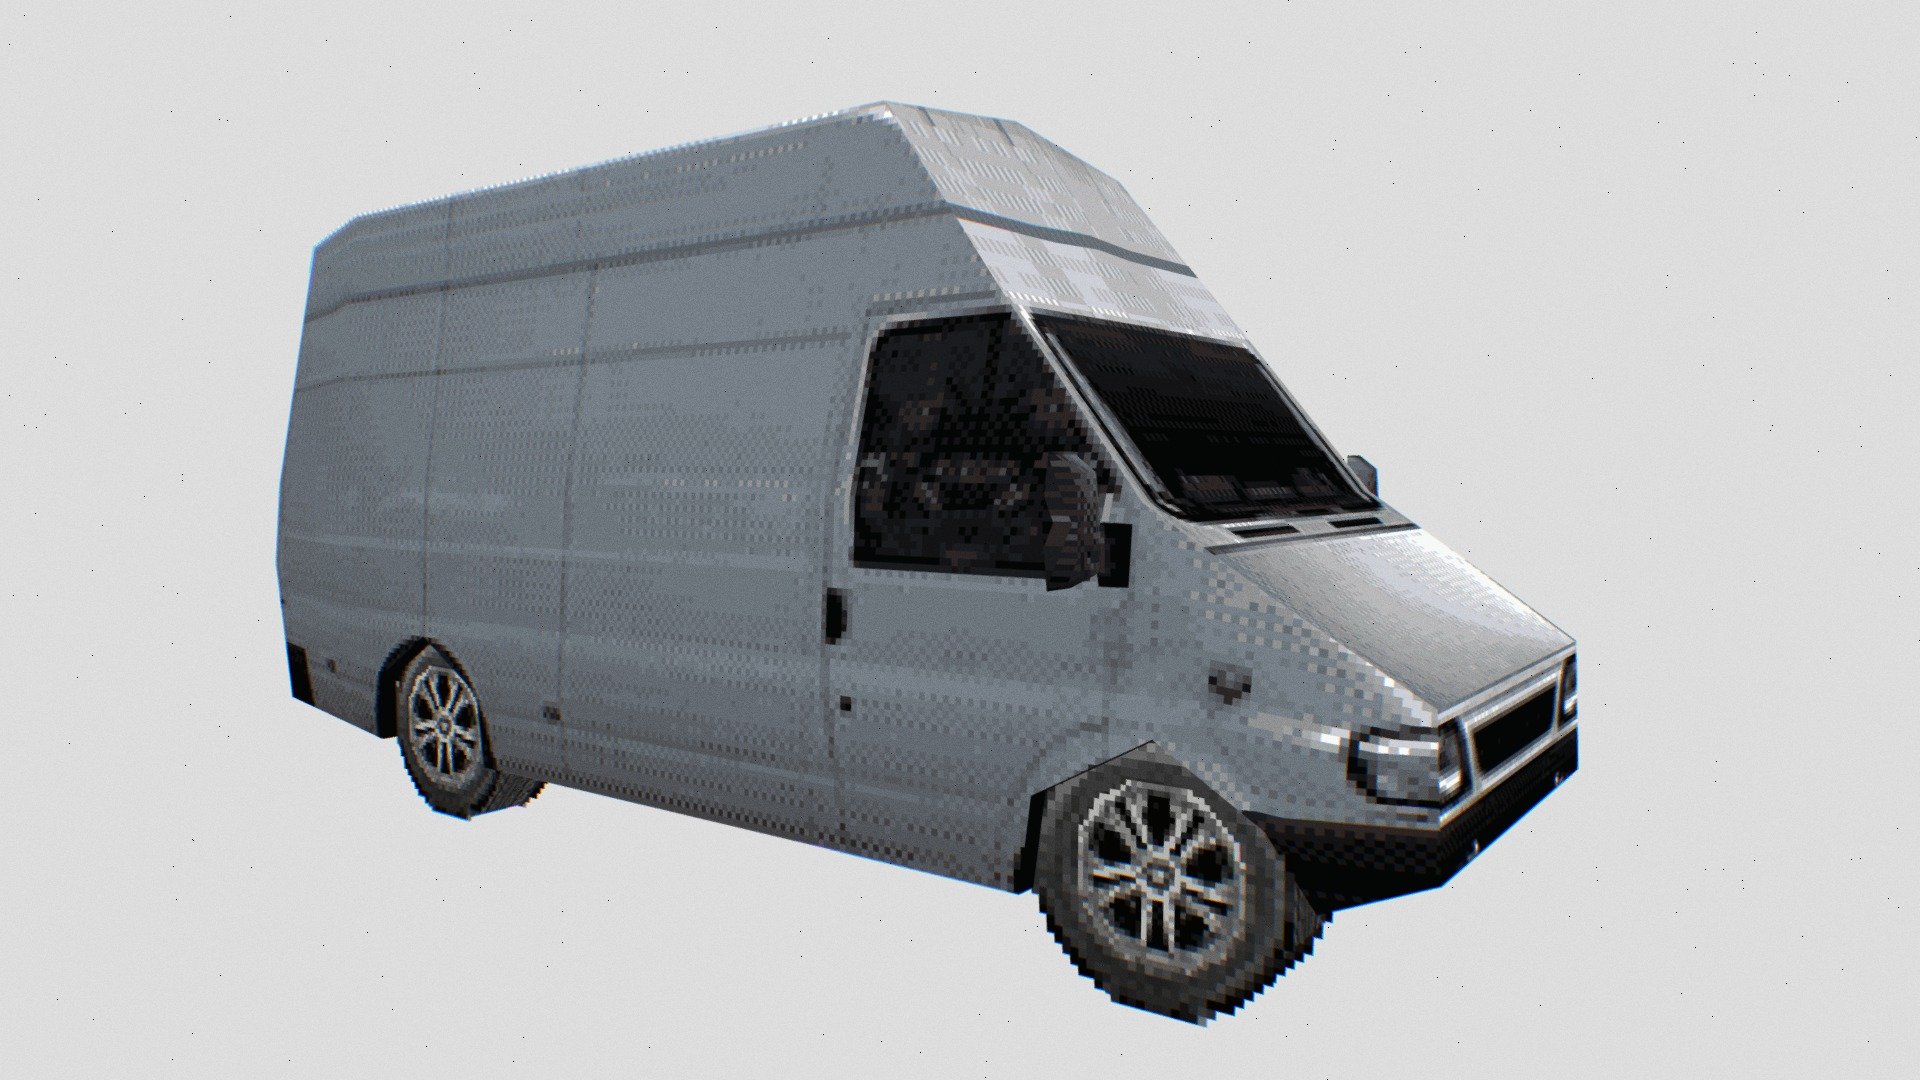 A generic white van that I reuse through my levels.

Designed for retro inspired projects or mobile games.

My YouTube channel where I document my game dev journey - https://www.youtube.com/@AaronMYoung Contact me on - Aaronmyoung94@gmail.com - PS1 Style Asset -  White Van - 3D model by AaronMYoung 3d model